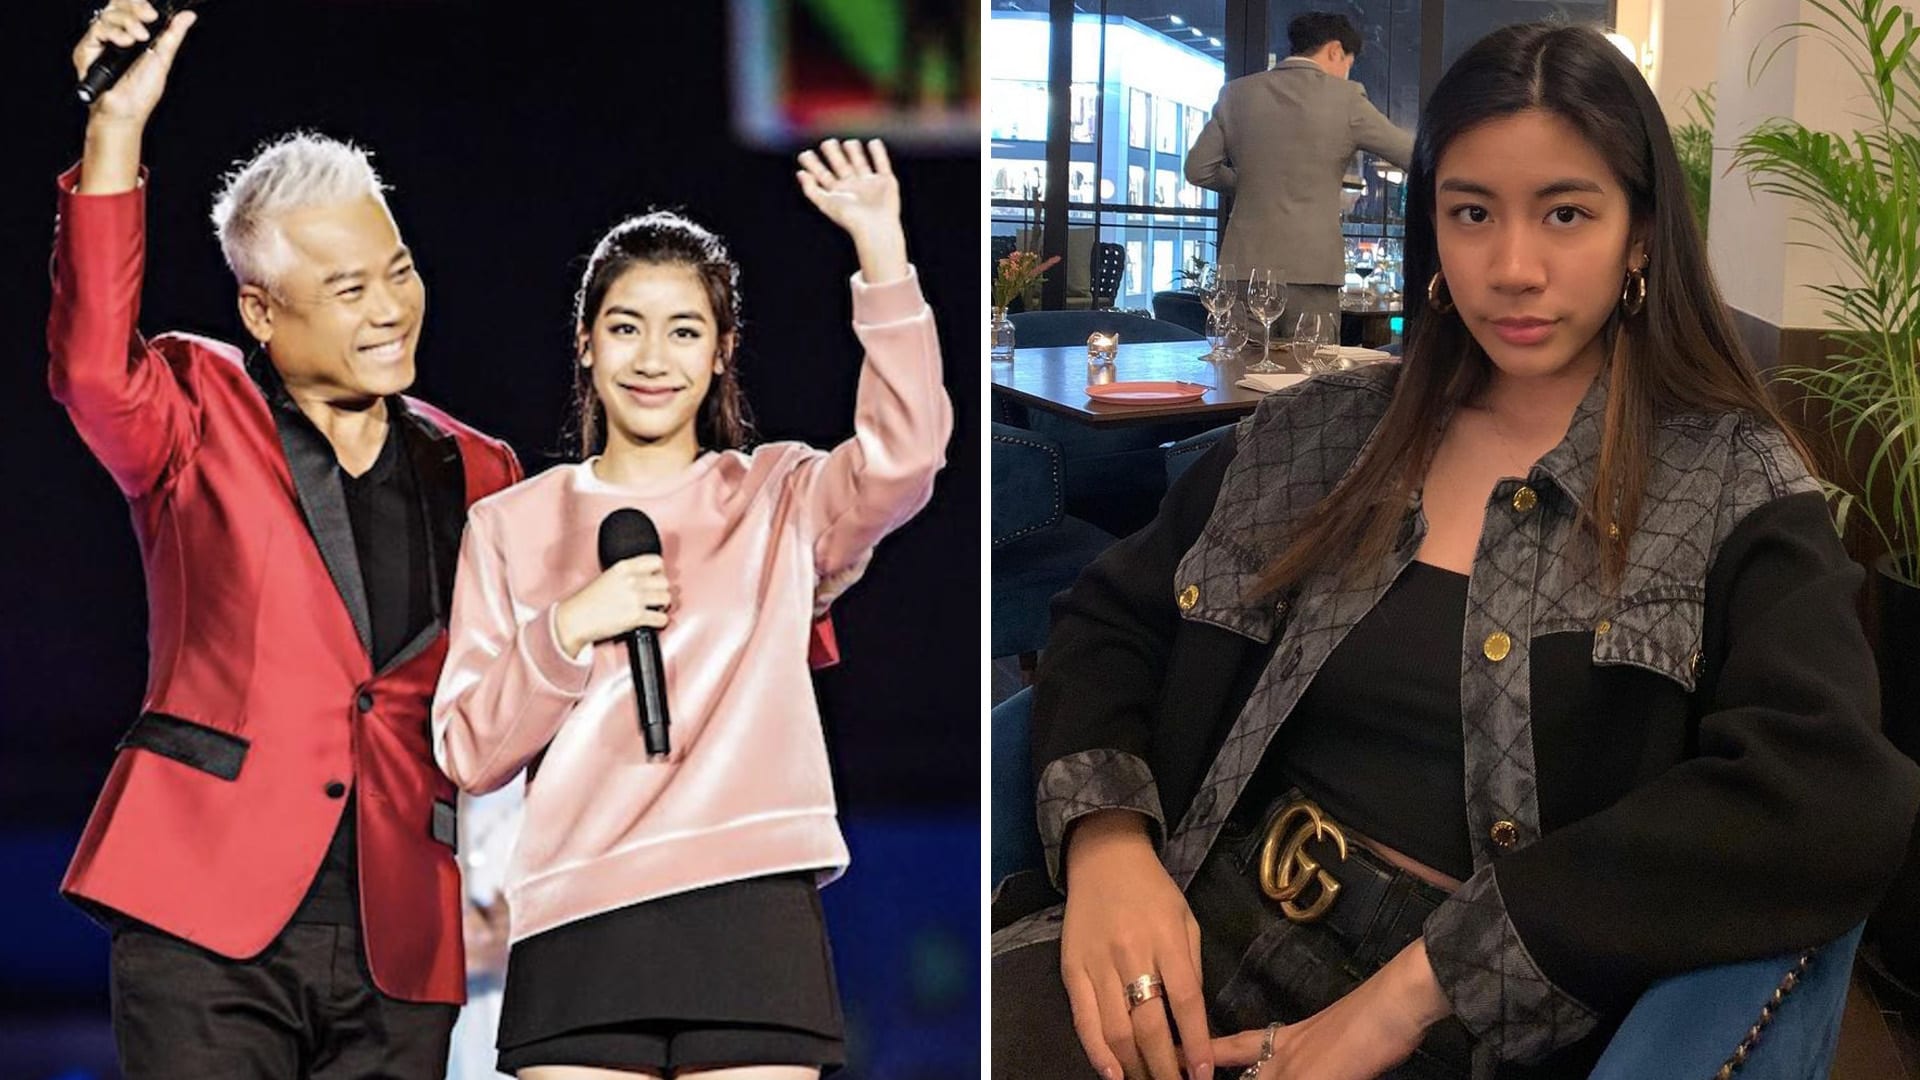 Eric Moo Invests S$480K In Music Production Company To Launch Daughter's Singing Career